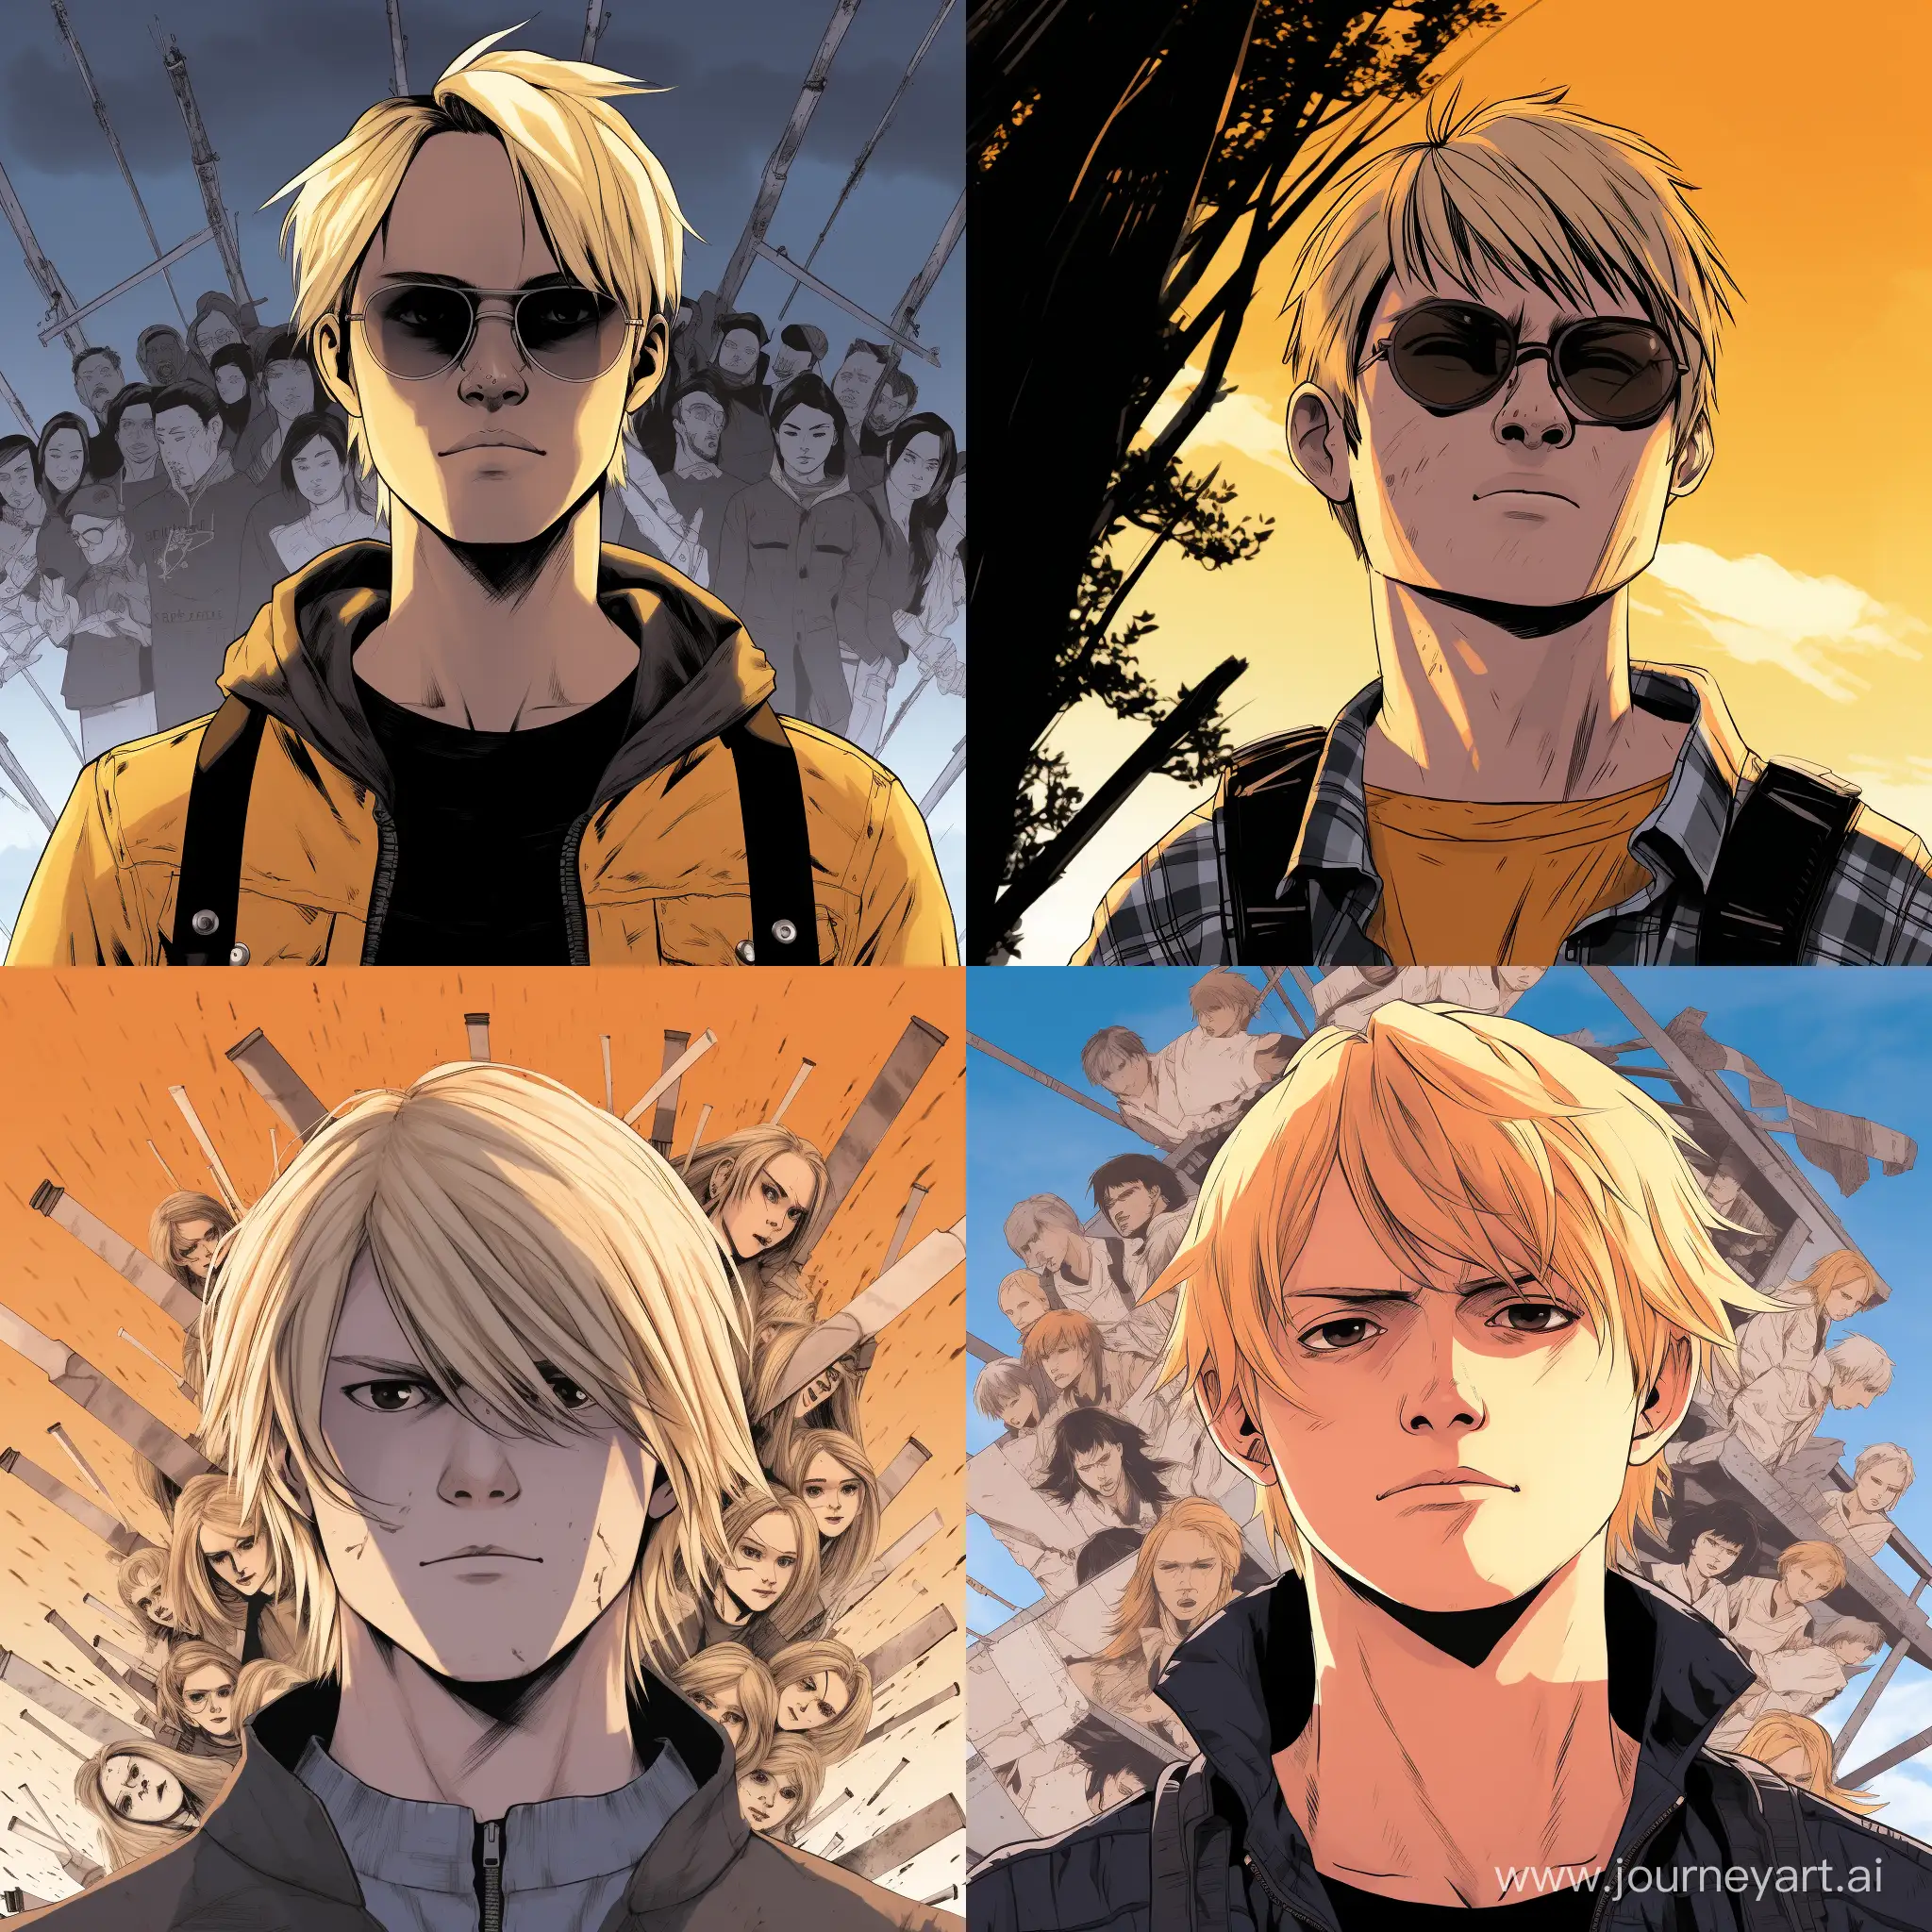 Denjis-Emotional-Evolution-Navigating-Identity-and-Relationships-in-Chainsaw-Man